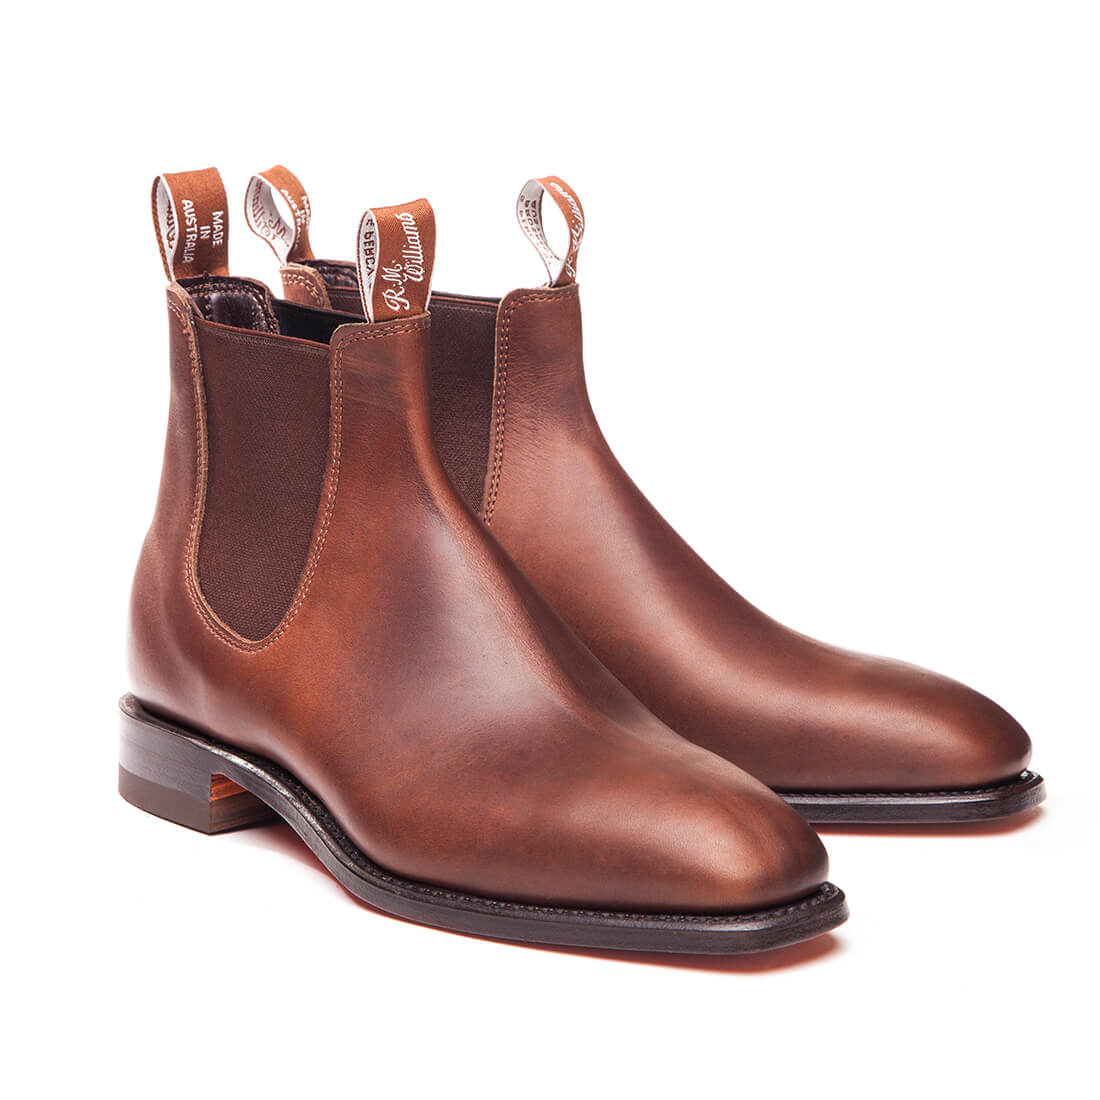 RM Williams Lachlan (Drover) Boots